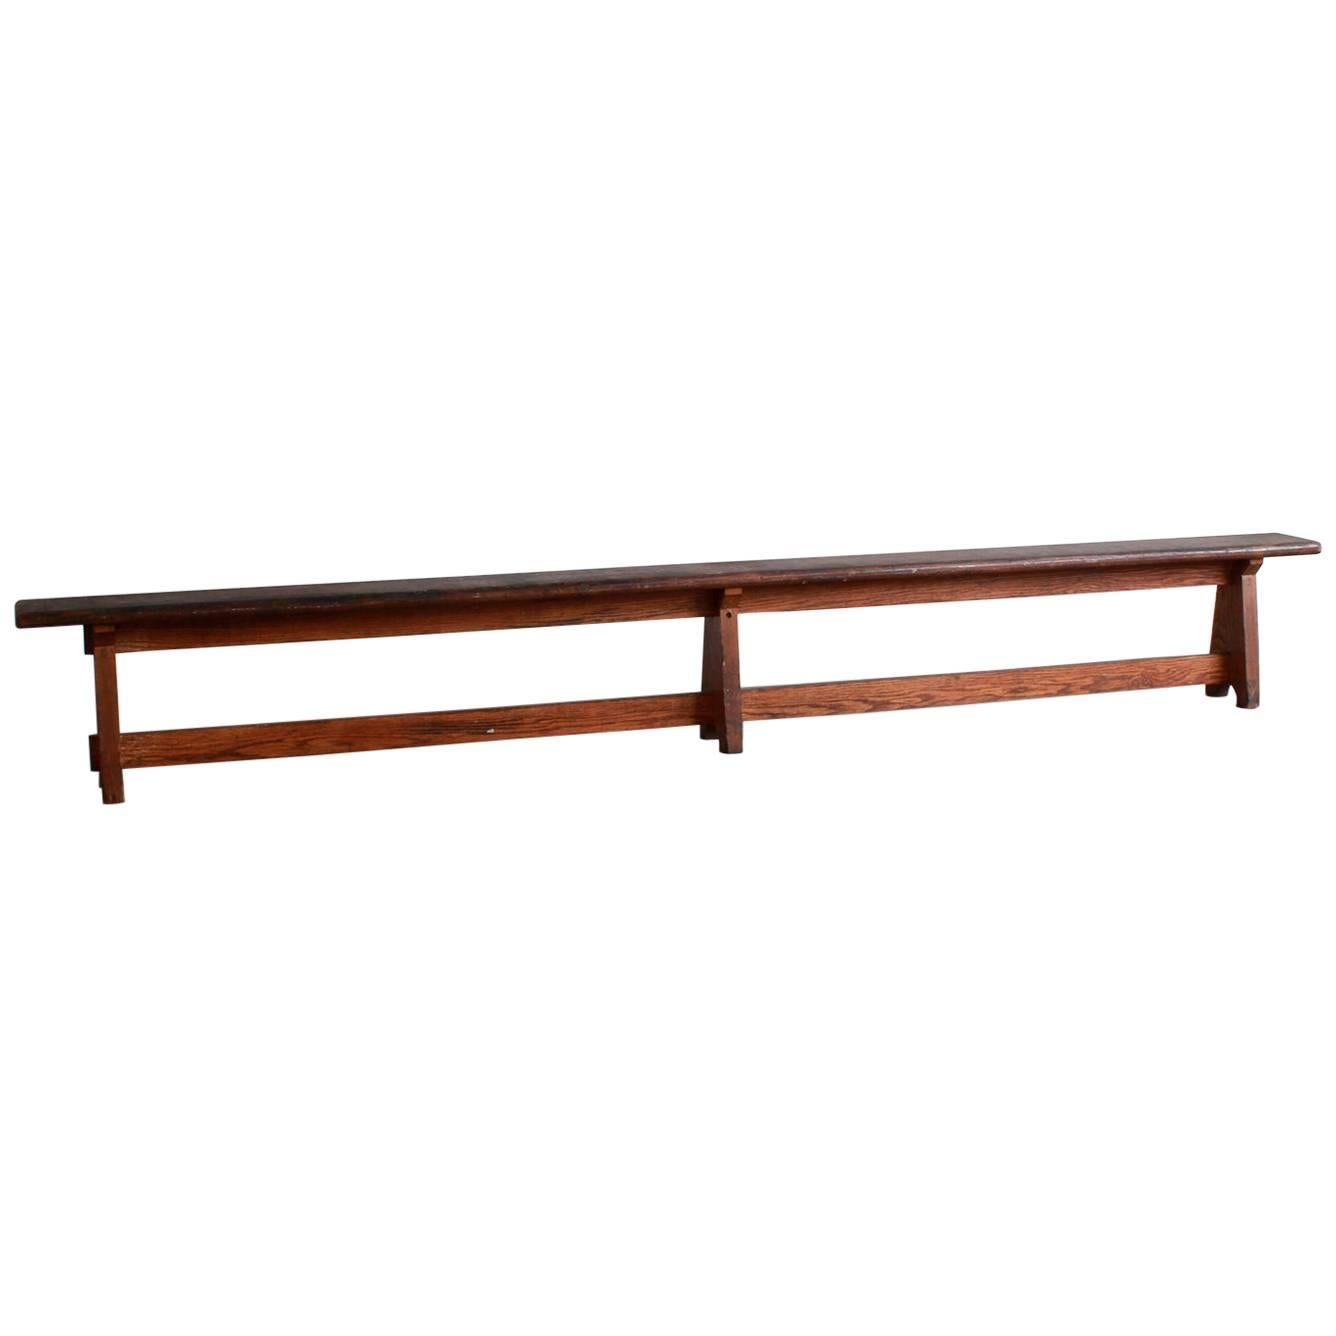 Long Rustic Bench with Middle Leg